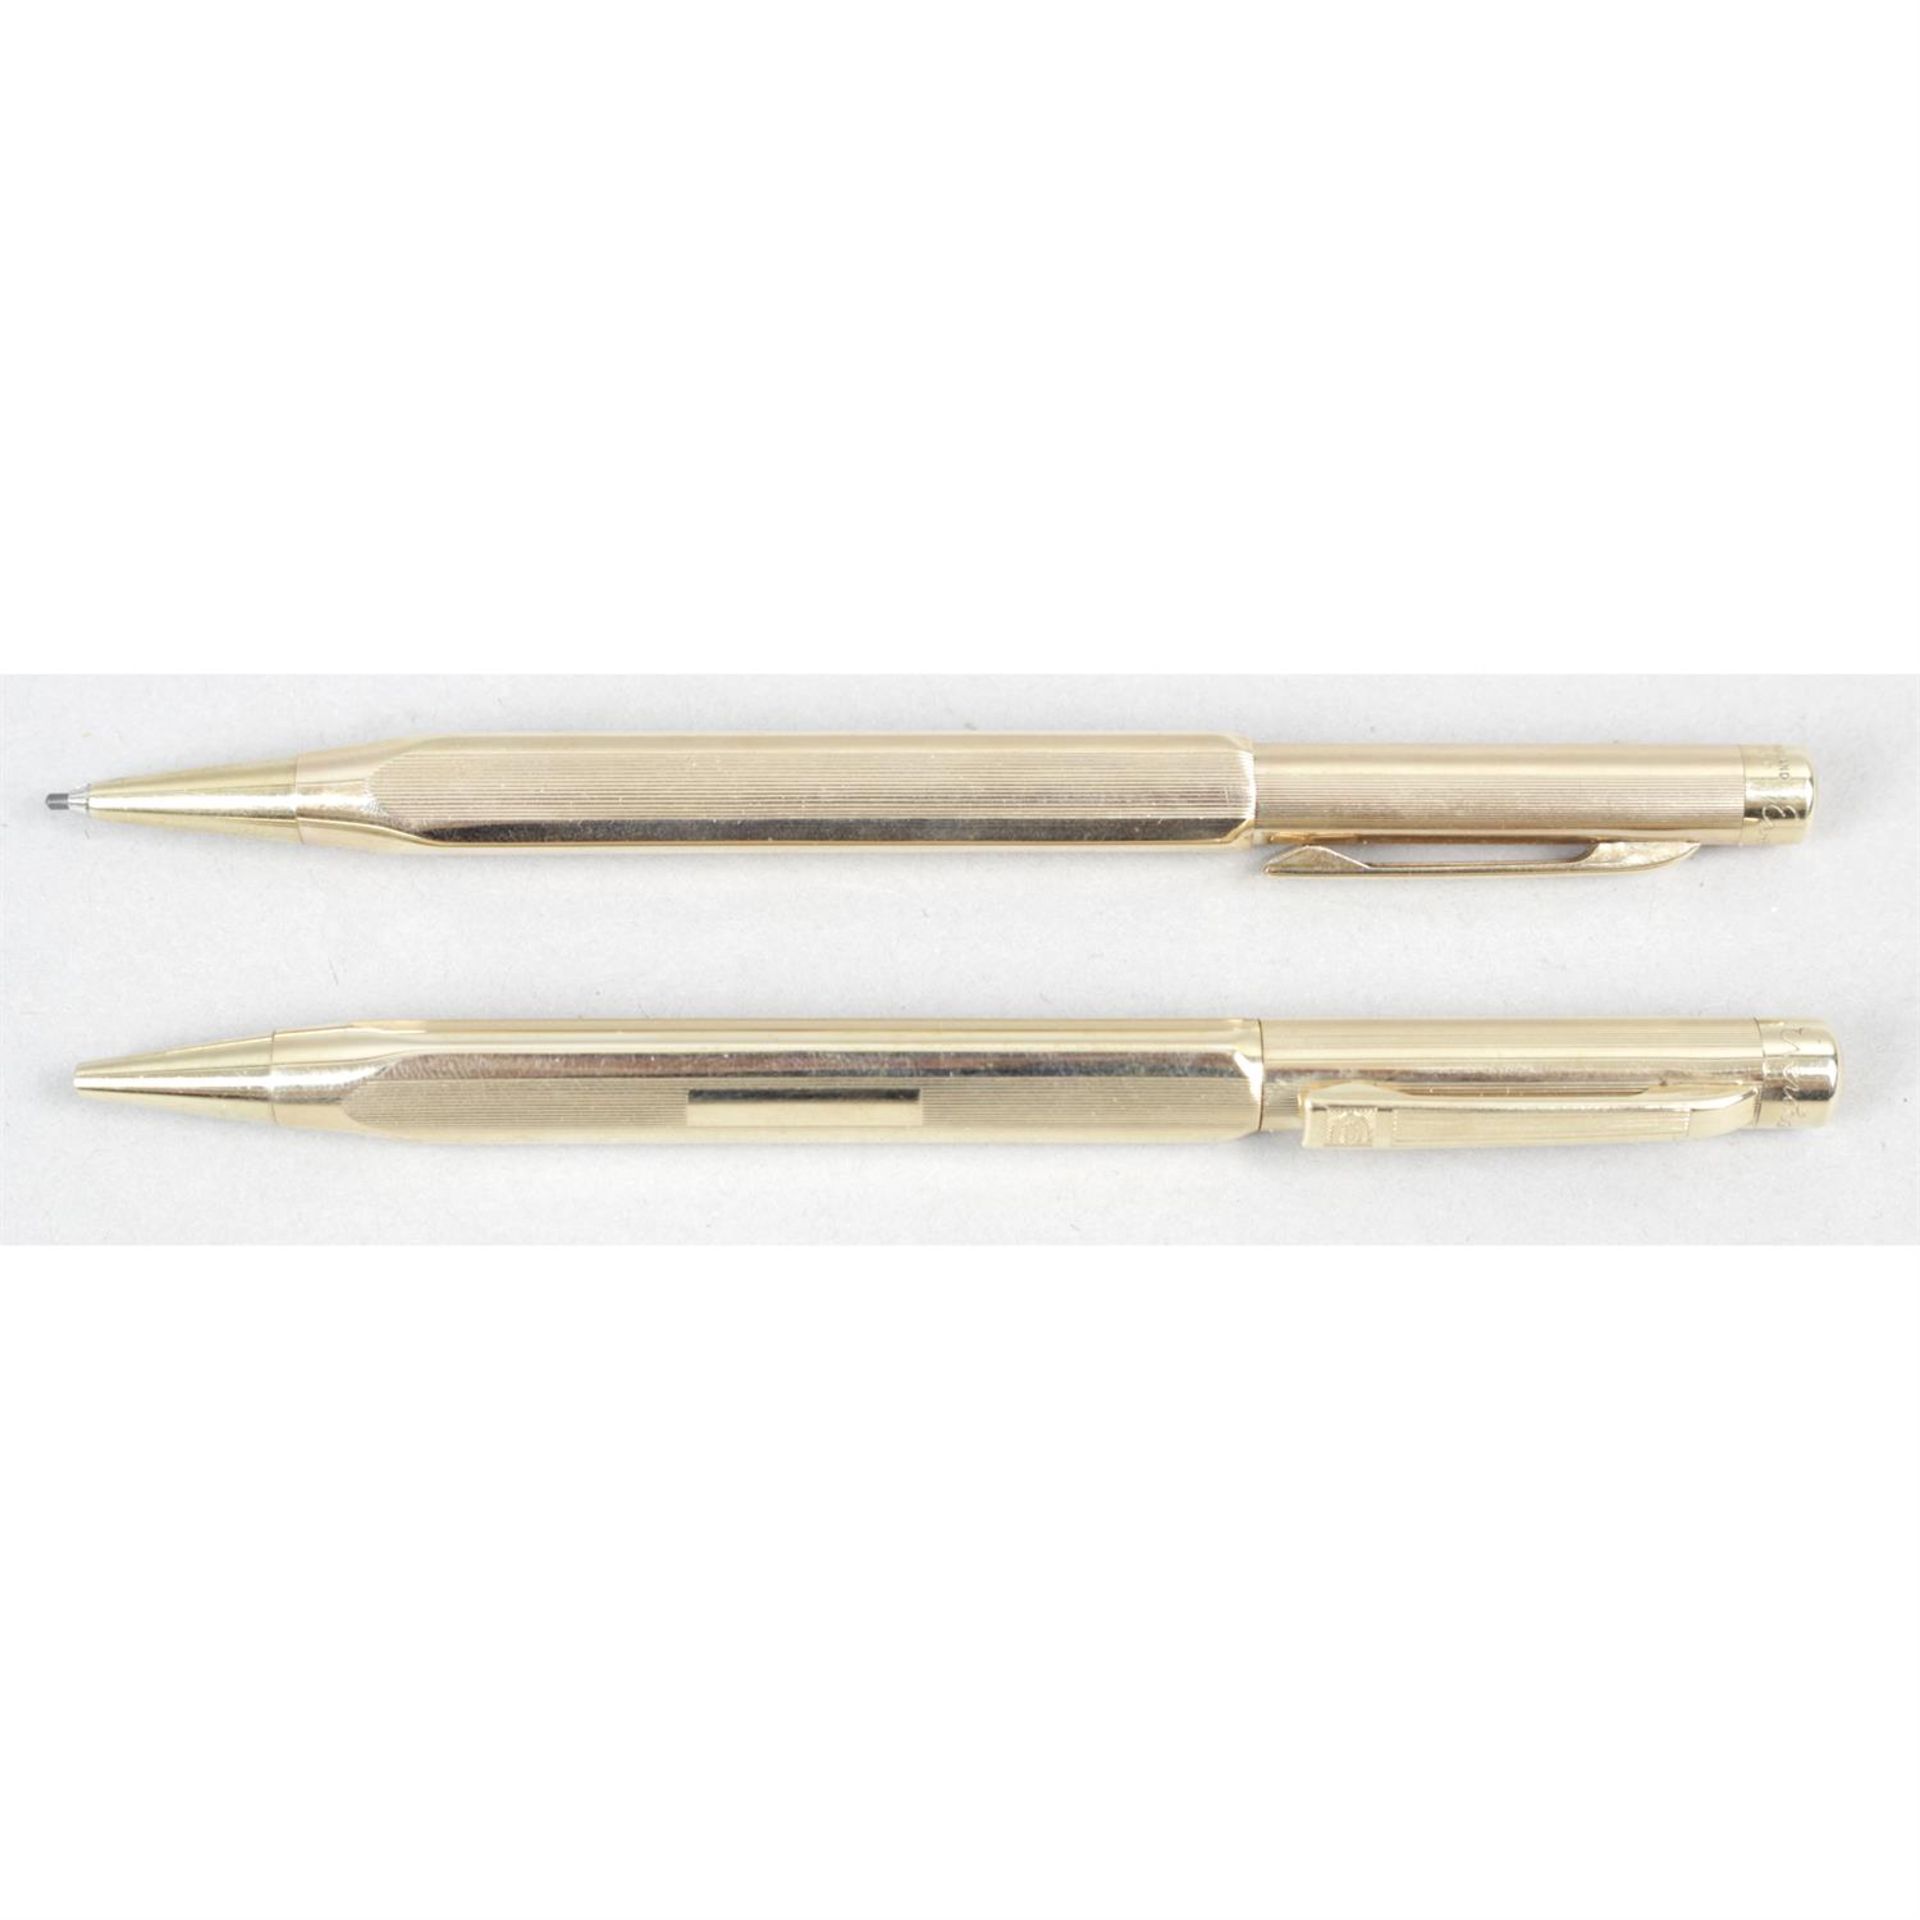 An Eversharp propelling pencil, together with a similar twist action propelling pen.